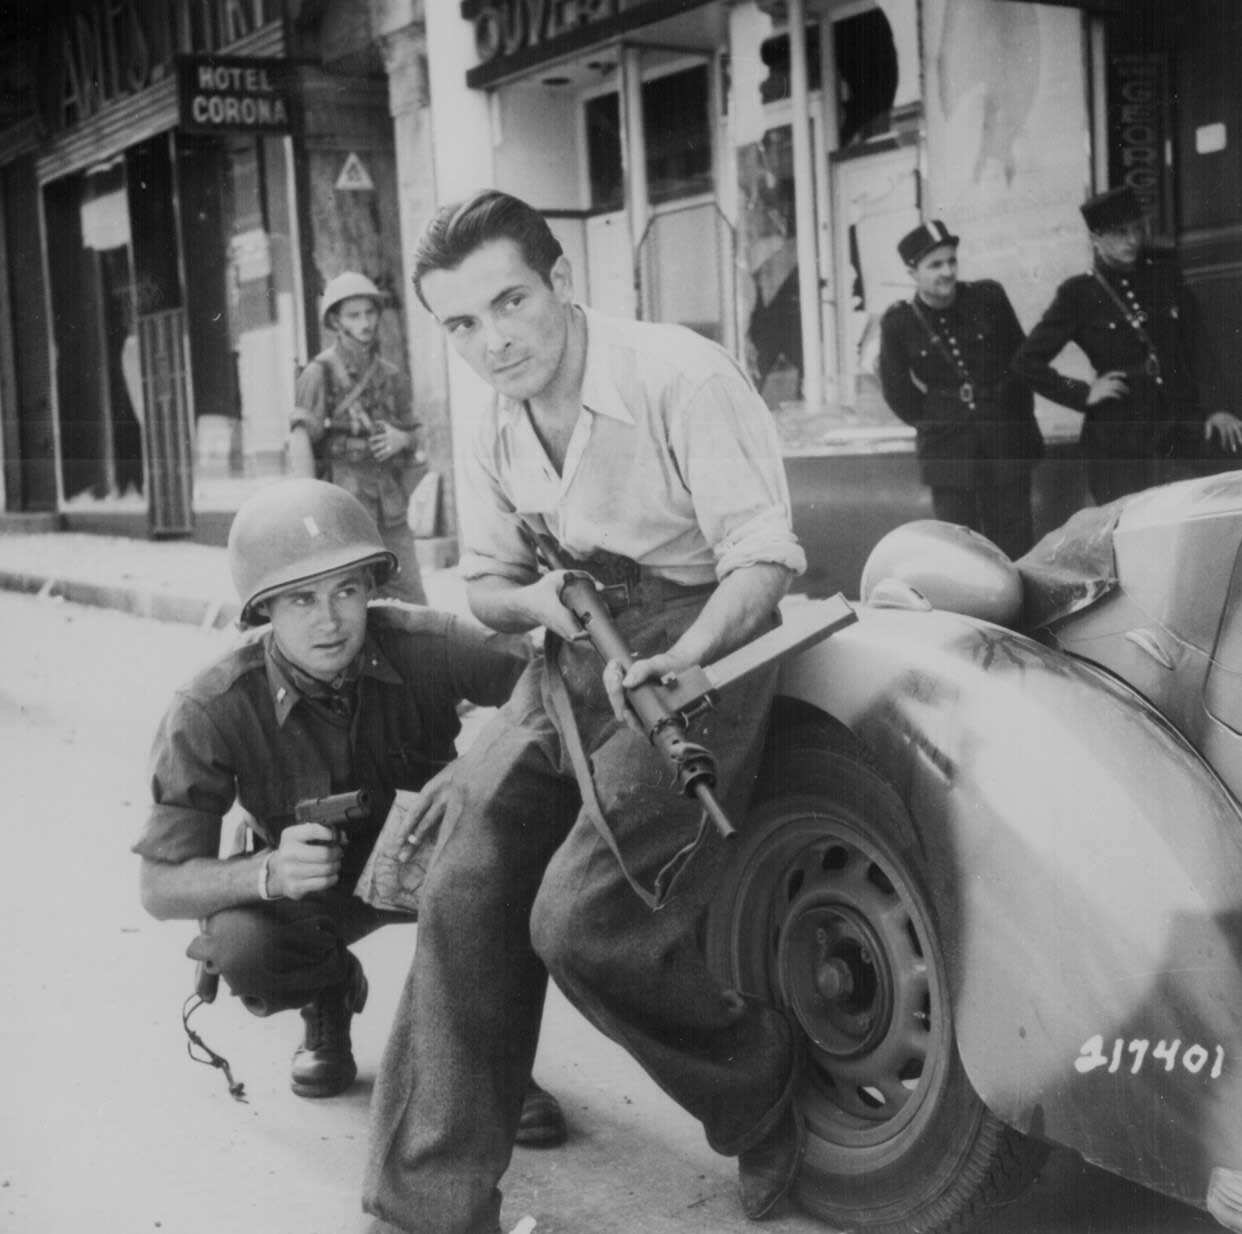 An American officer and a French partisan with a Sten sub-machinegun crouched behind a car during a street fight in a French city, Jun 1944